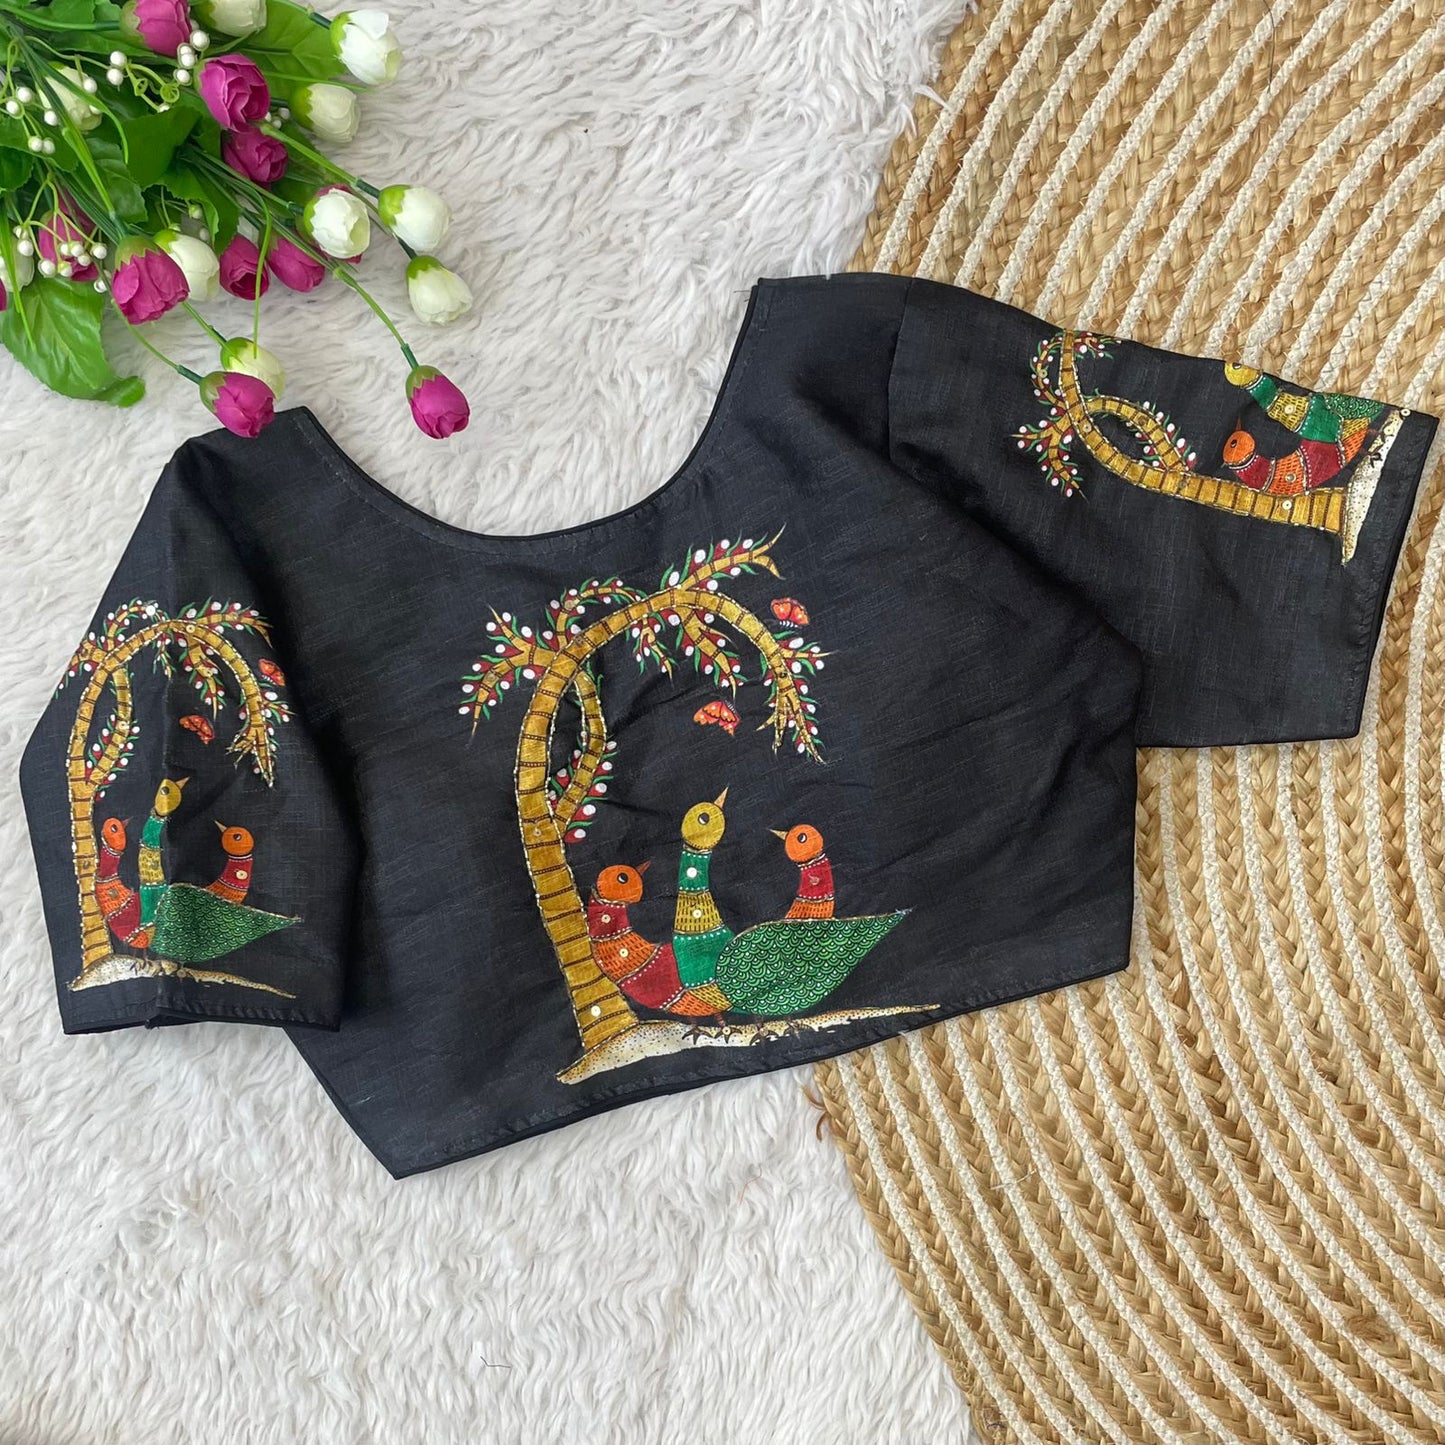 Sierra The Label Silk Heavy Embroidery Blouse